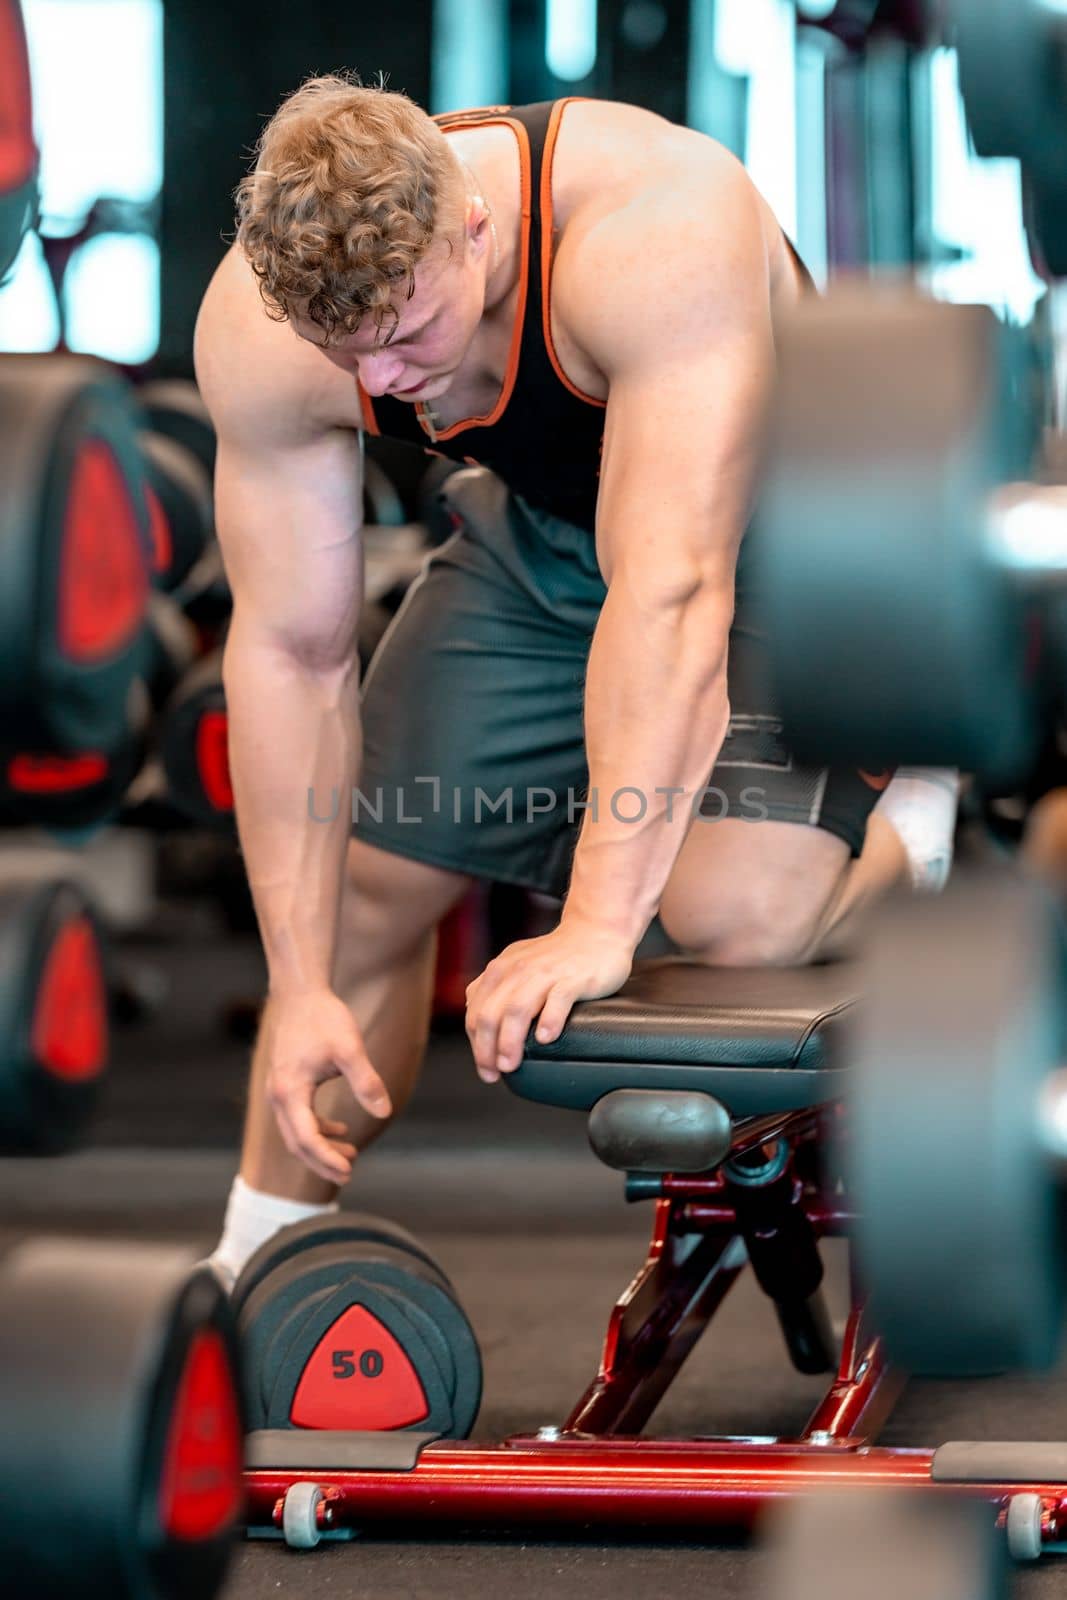 One-arm dumbbell pull-ups in a forward bend with knee support by Edophoto